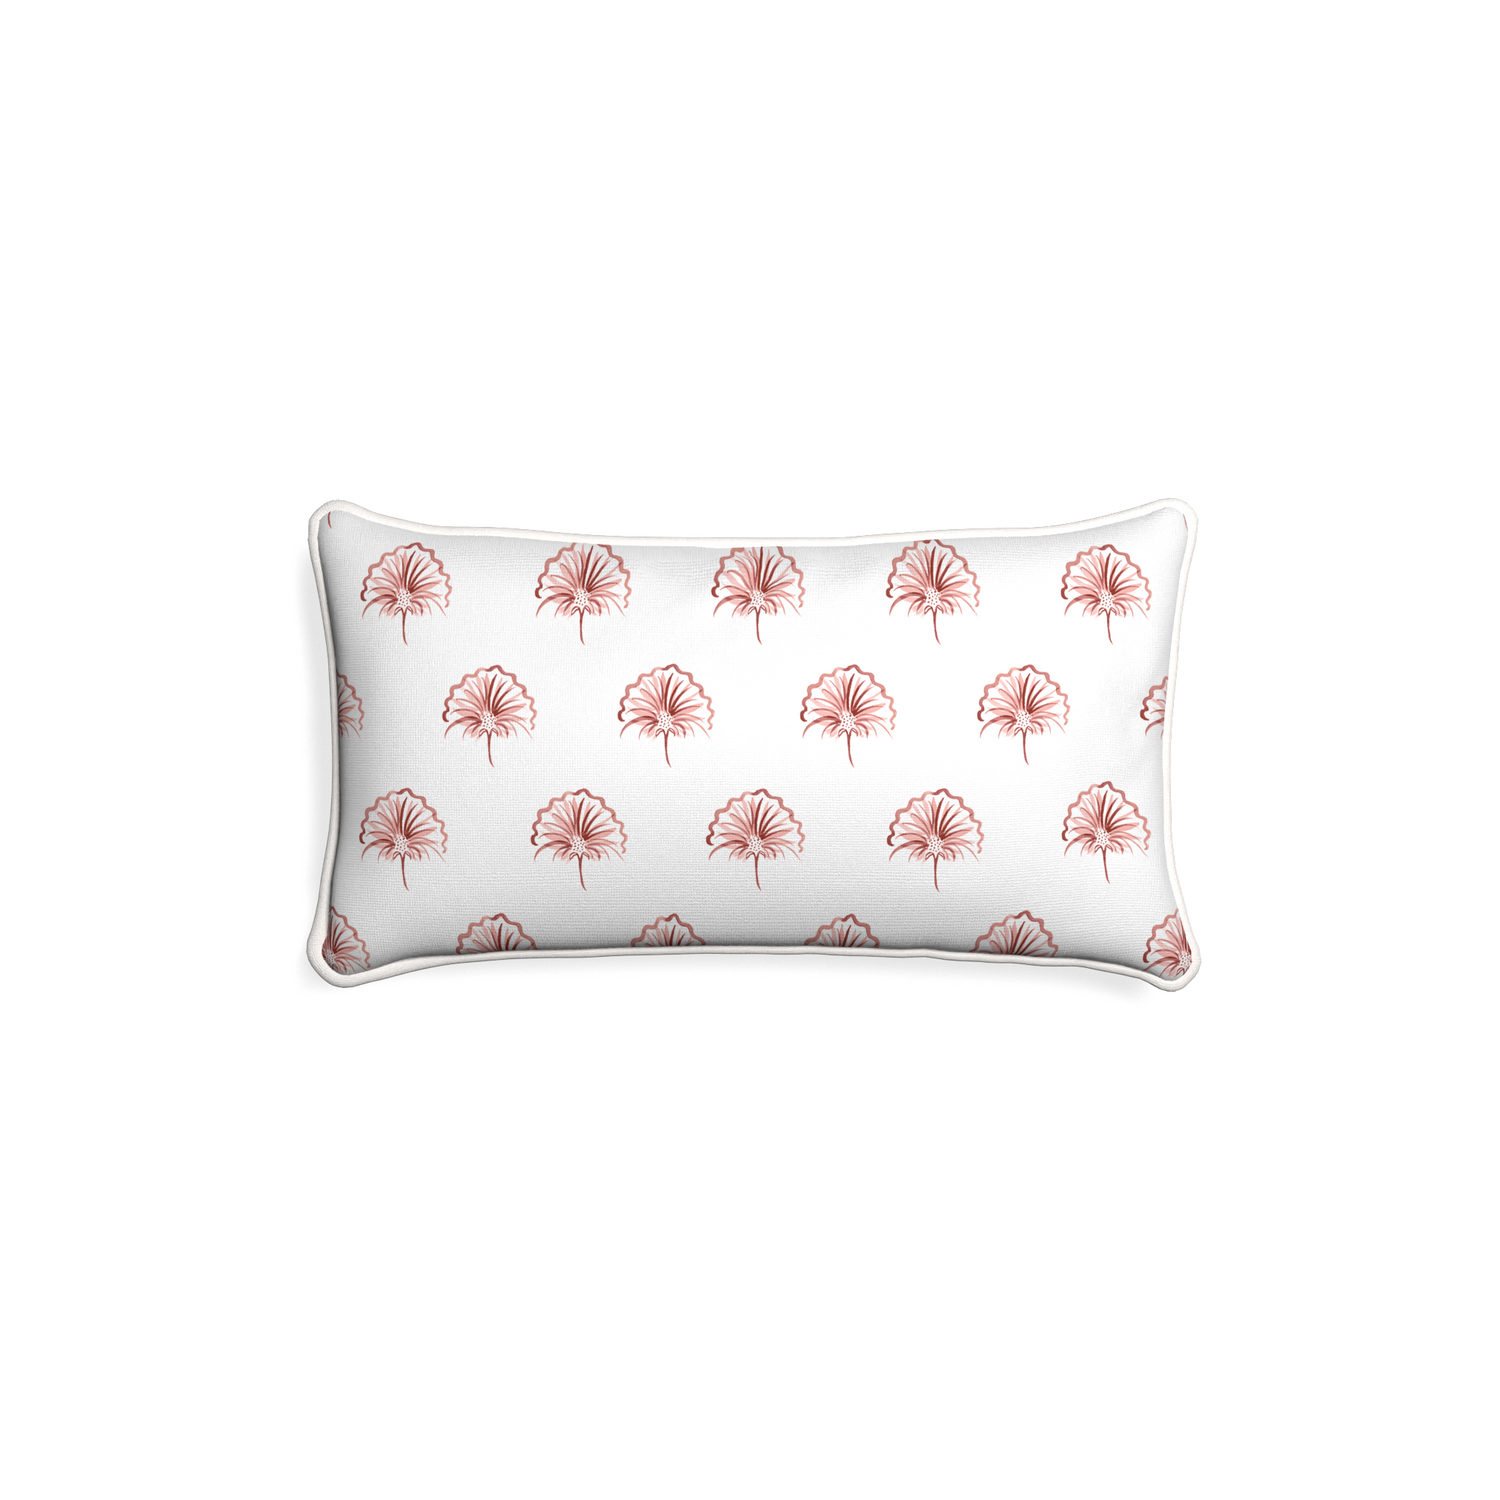 Petite-lumbar penelope rose custom floral pinkpillow with snow piping on white background